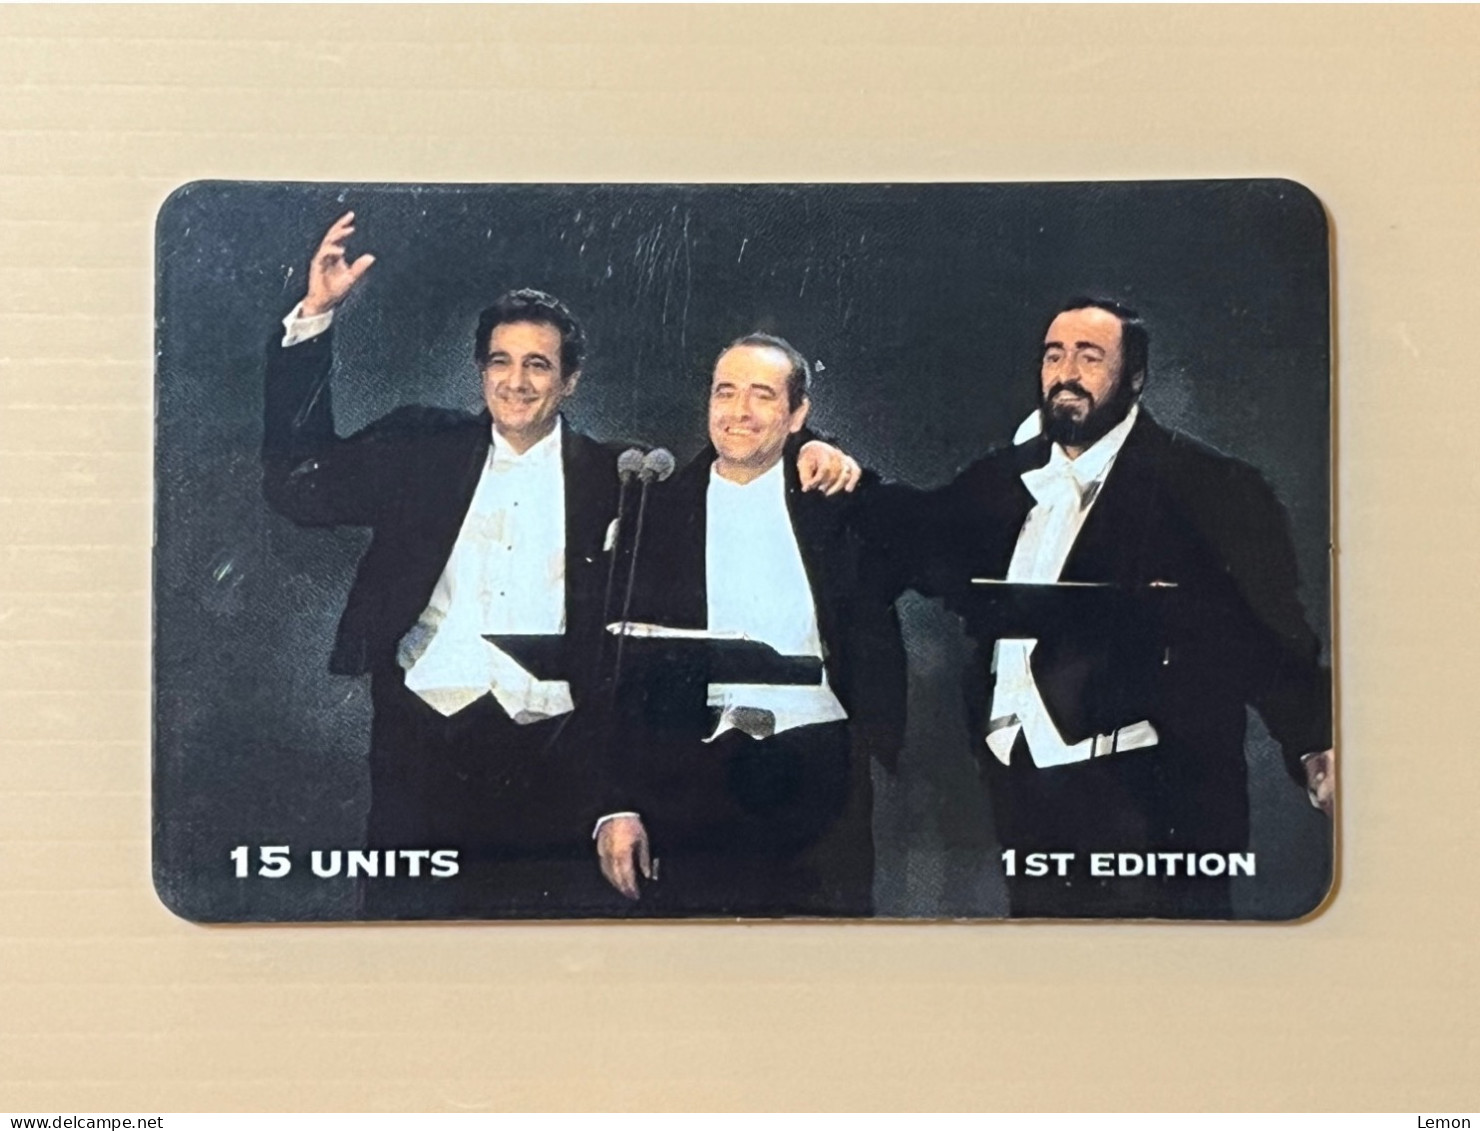 Mint USA UNITED STATES America Prepaid Telecard Phonecard, The 3 Tenors In Concert, Set Of 1 Mint Card - Colecciones